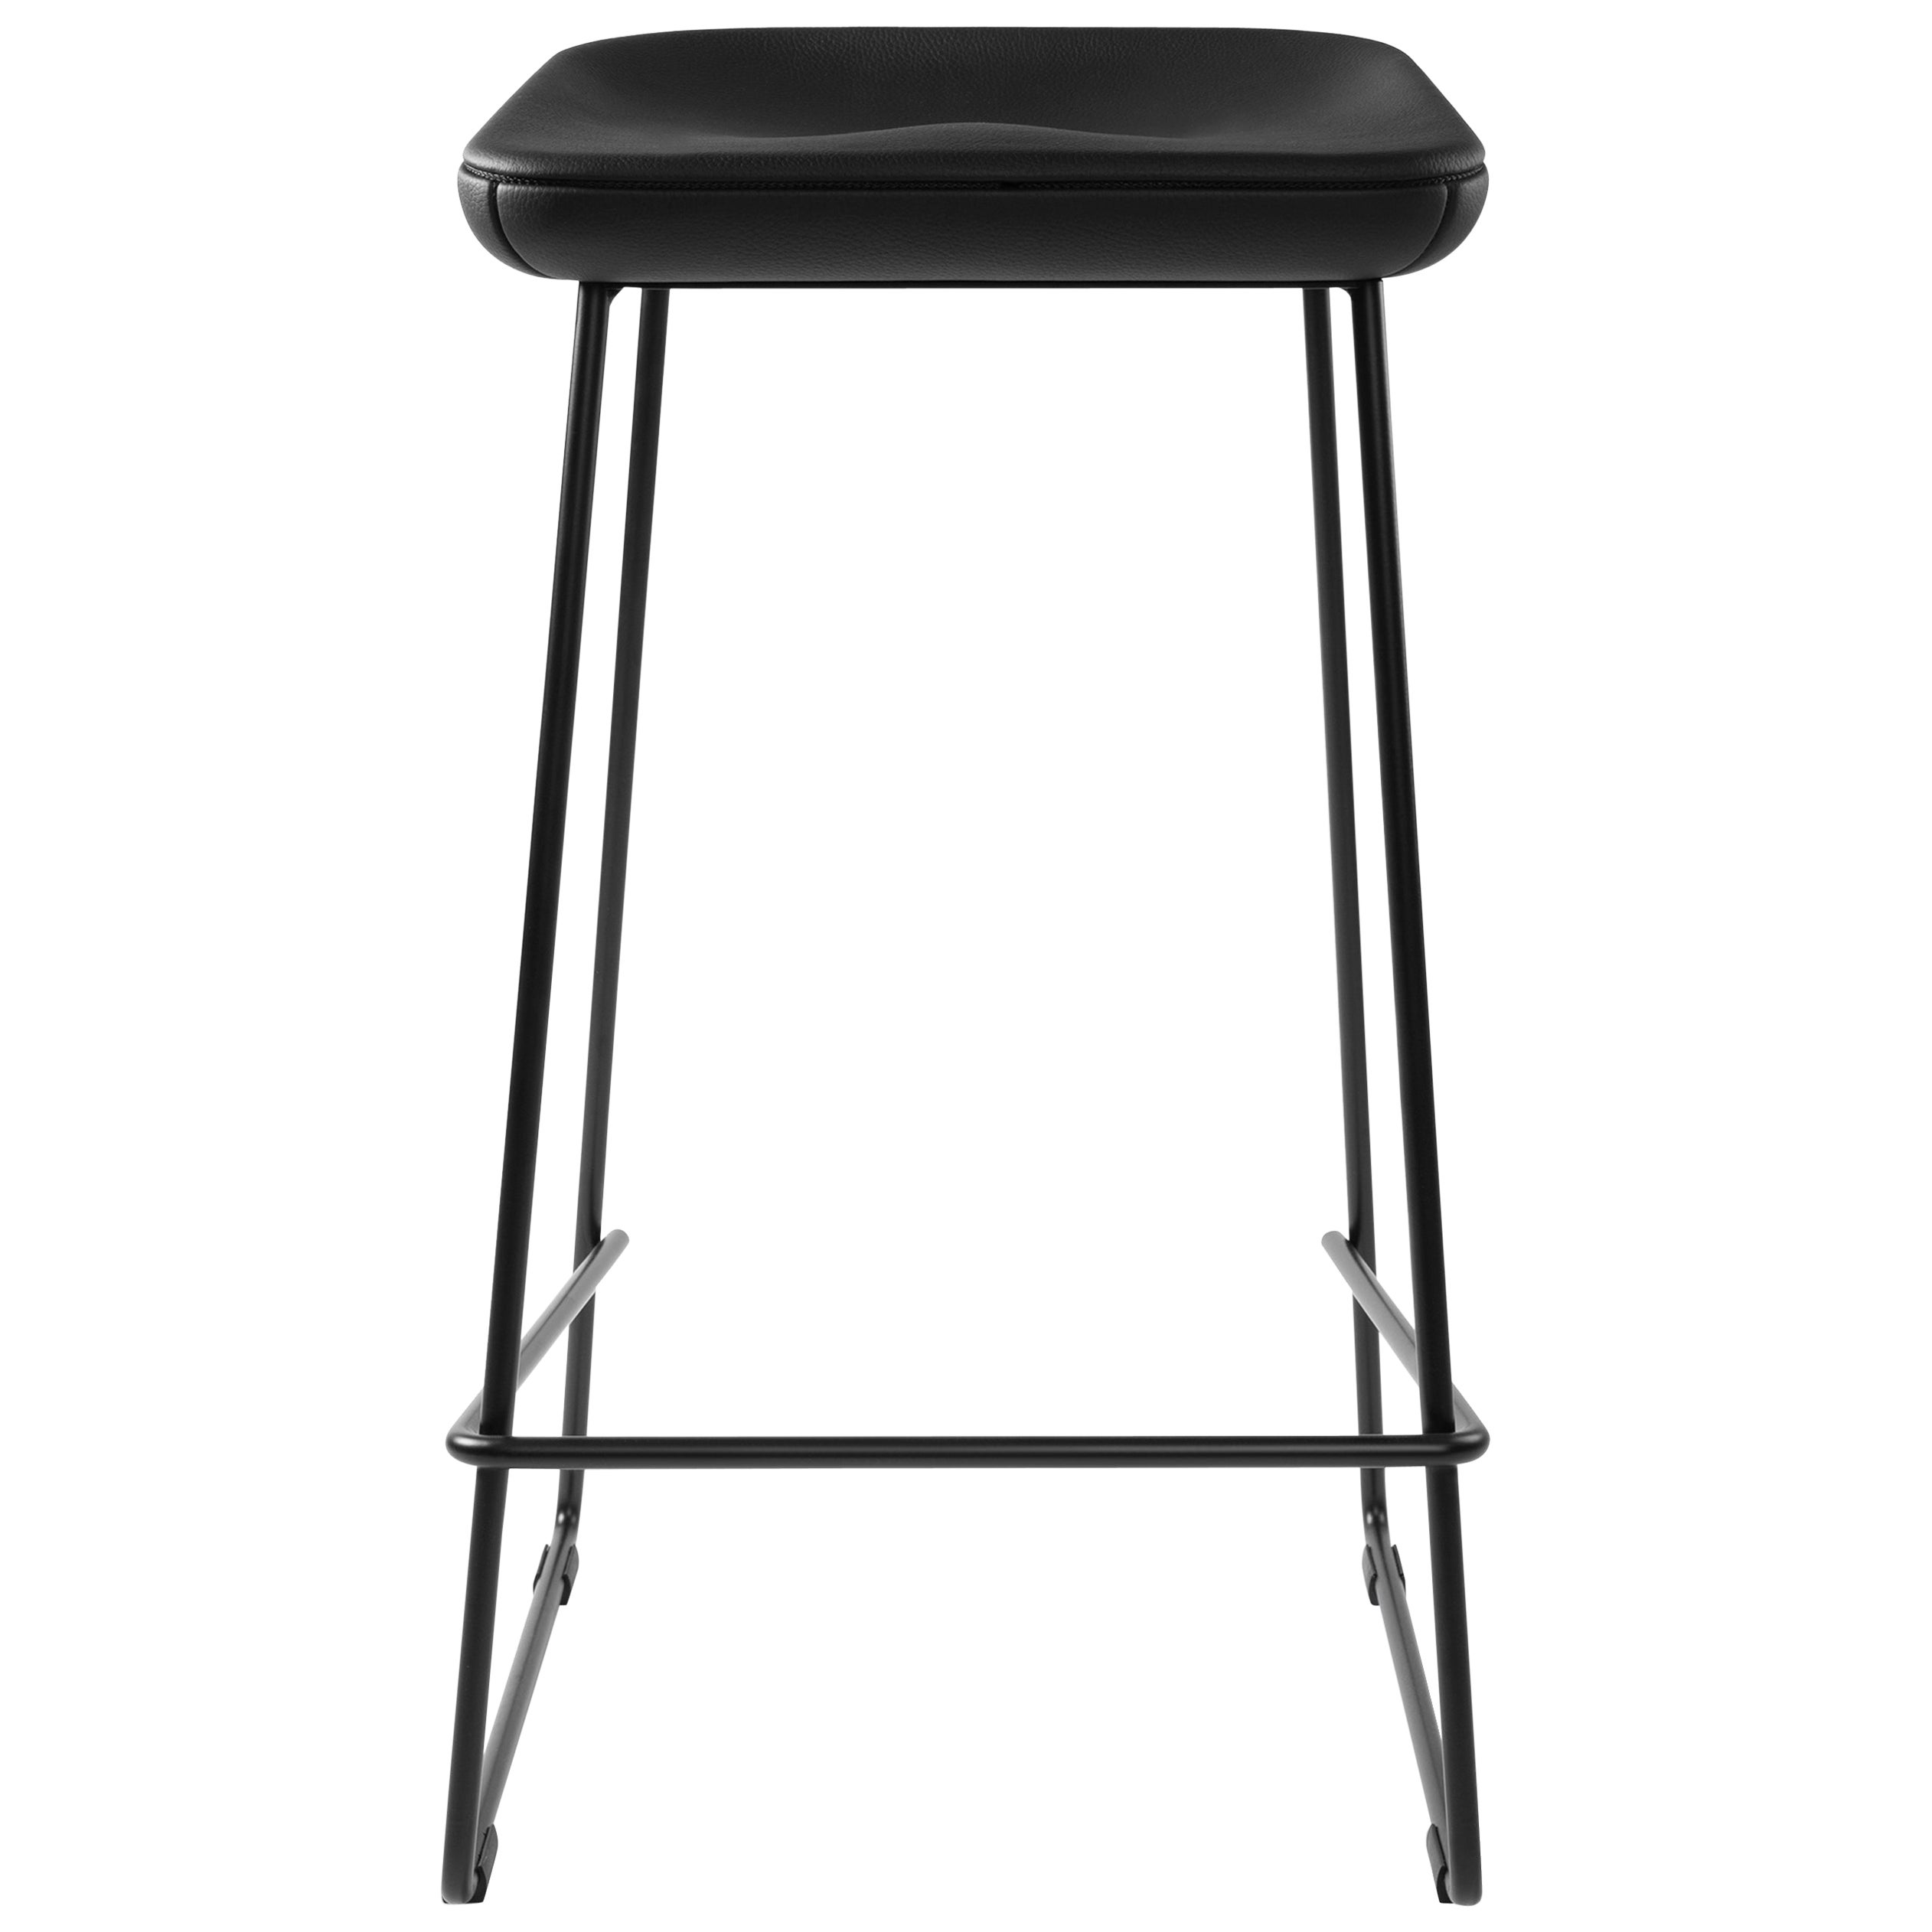 Stylish and Comfortable Counter Stool Wave with Leather Seat and Steel Frame. Discover the perfect seating solution for your bar or kitchen counter with the Counter Stool Wave. Made with a comfortable leather seat and durable steel frame, this